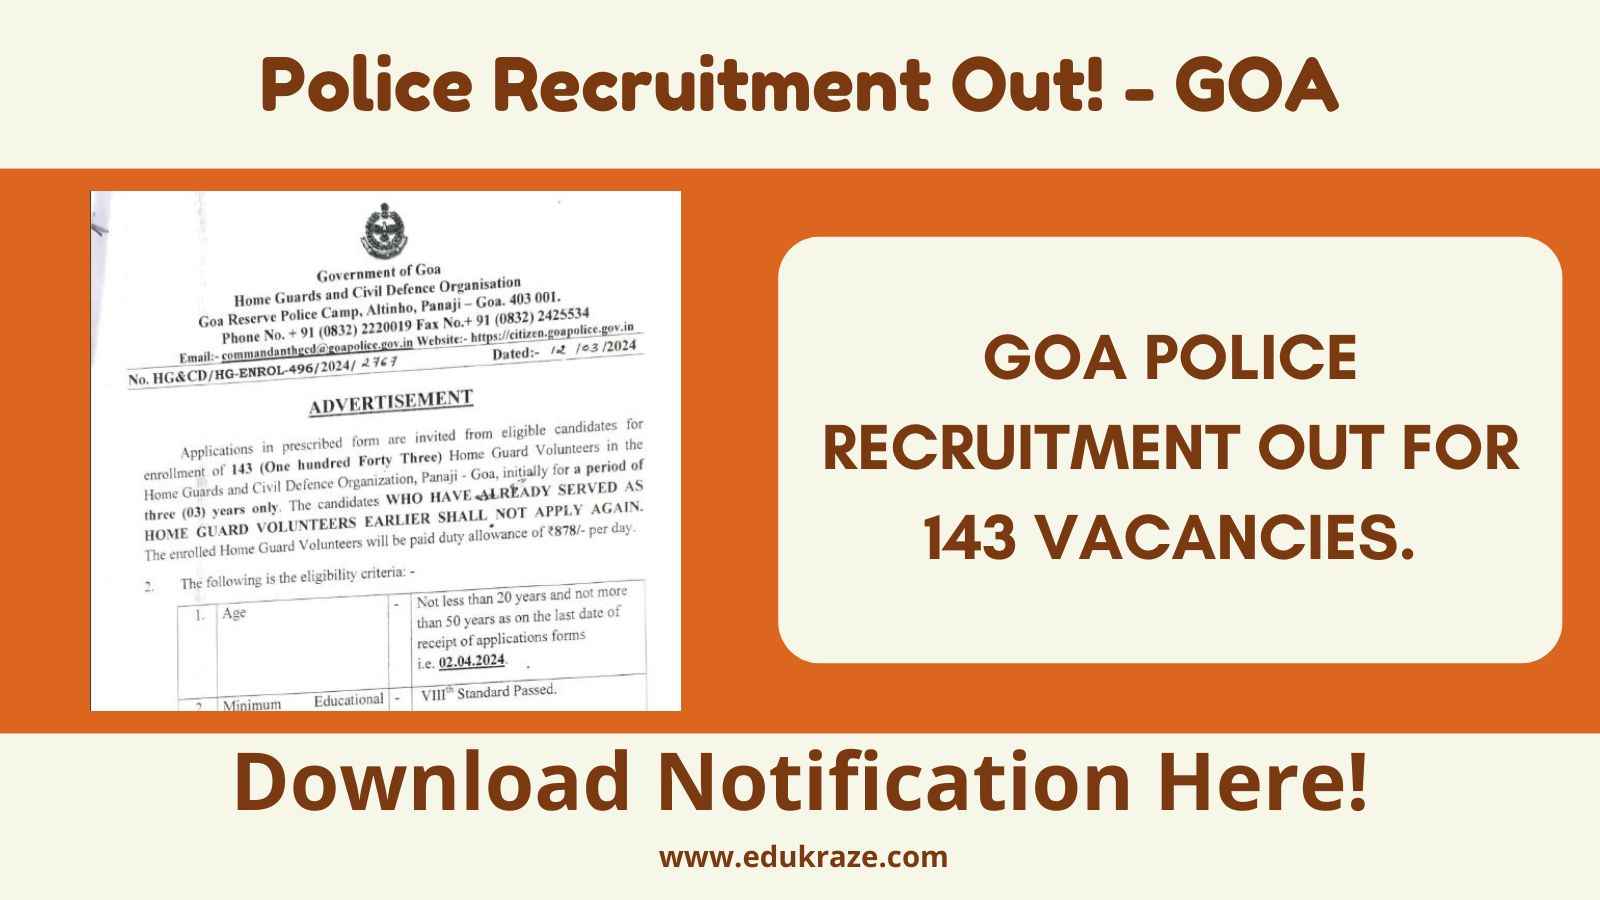 GOA POLICE RECRUITMENT OUT FOR 143 VACANCIES.